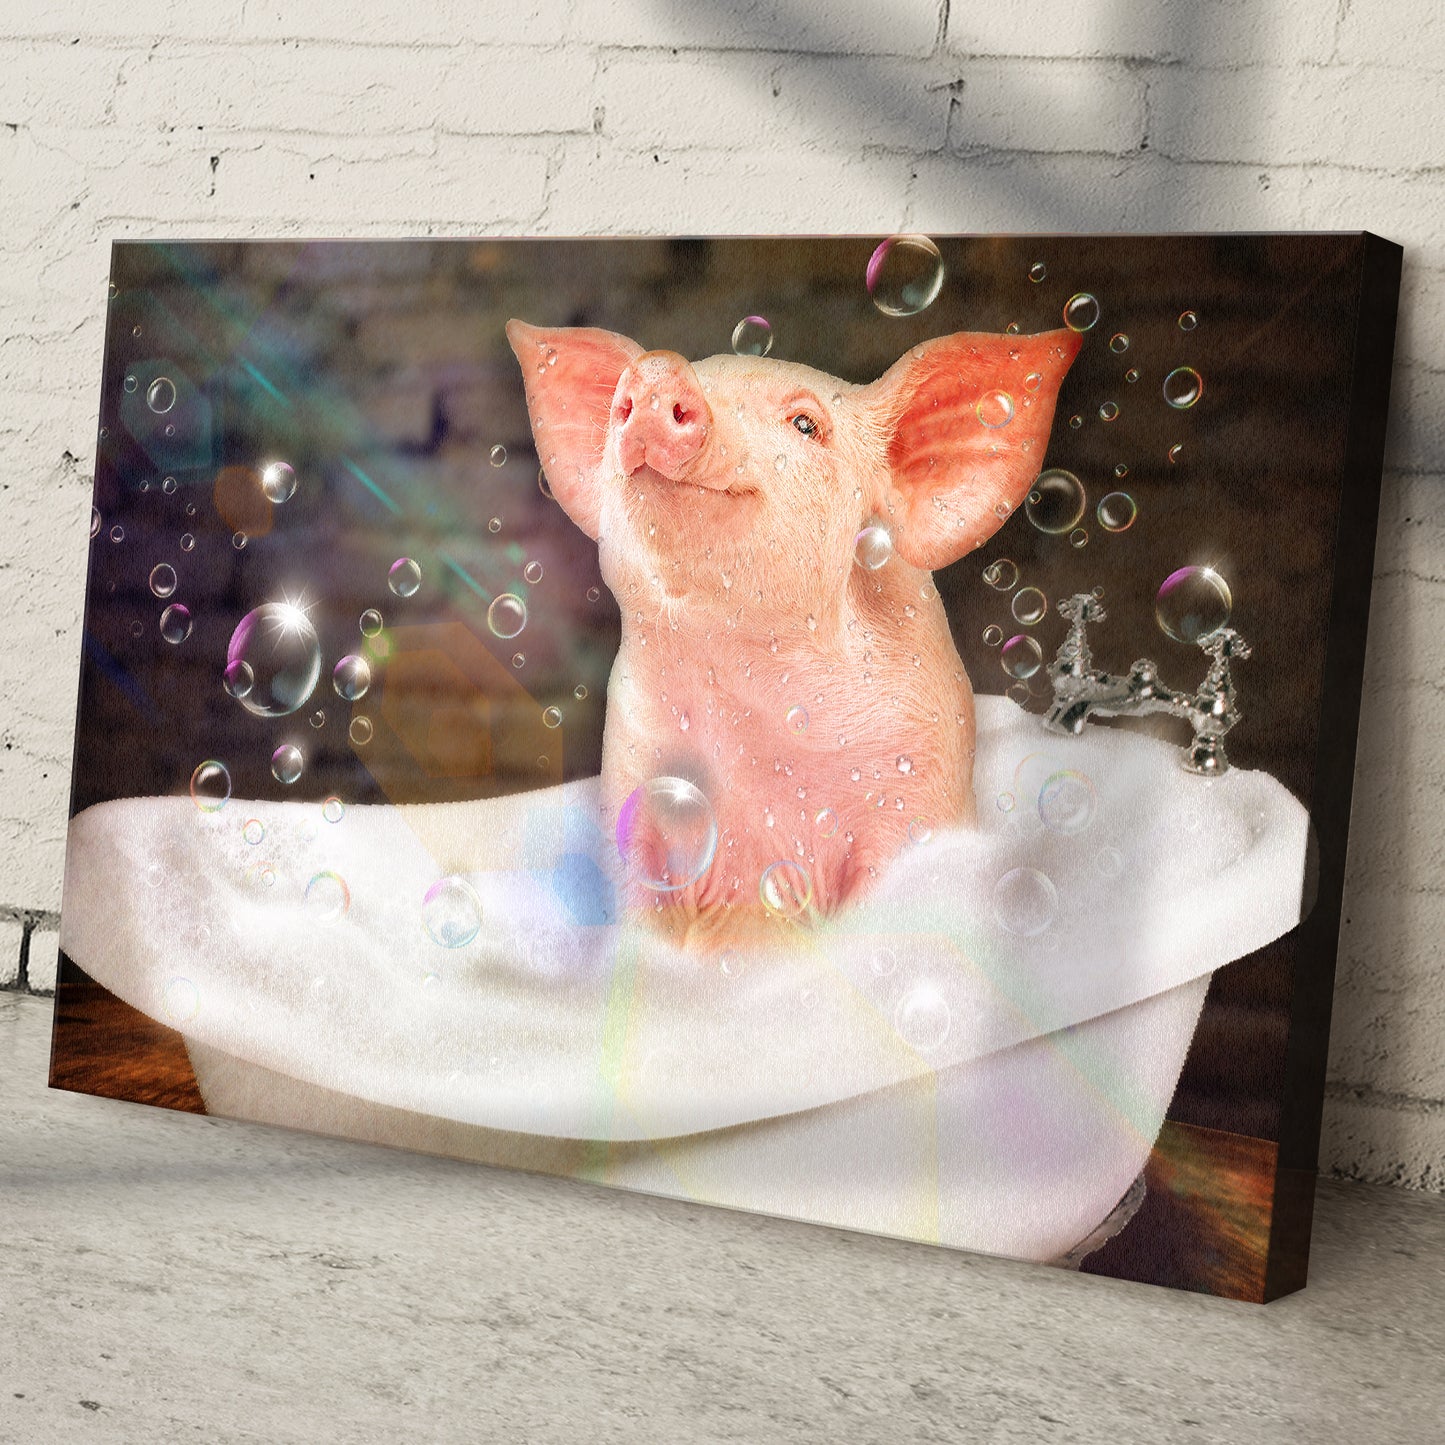 Bubble Bath Pig In Tub Canvas Wall Art Style 1 - Image by Tailored Canvases